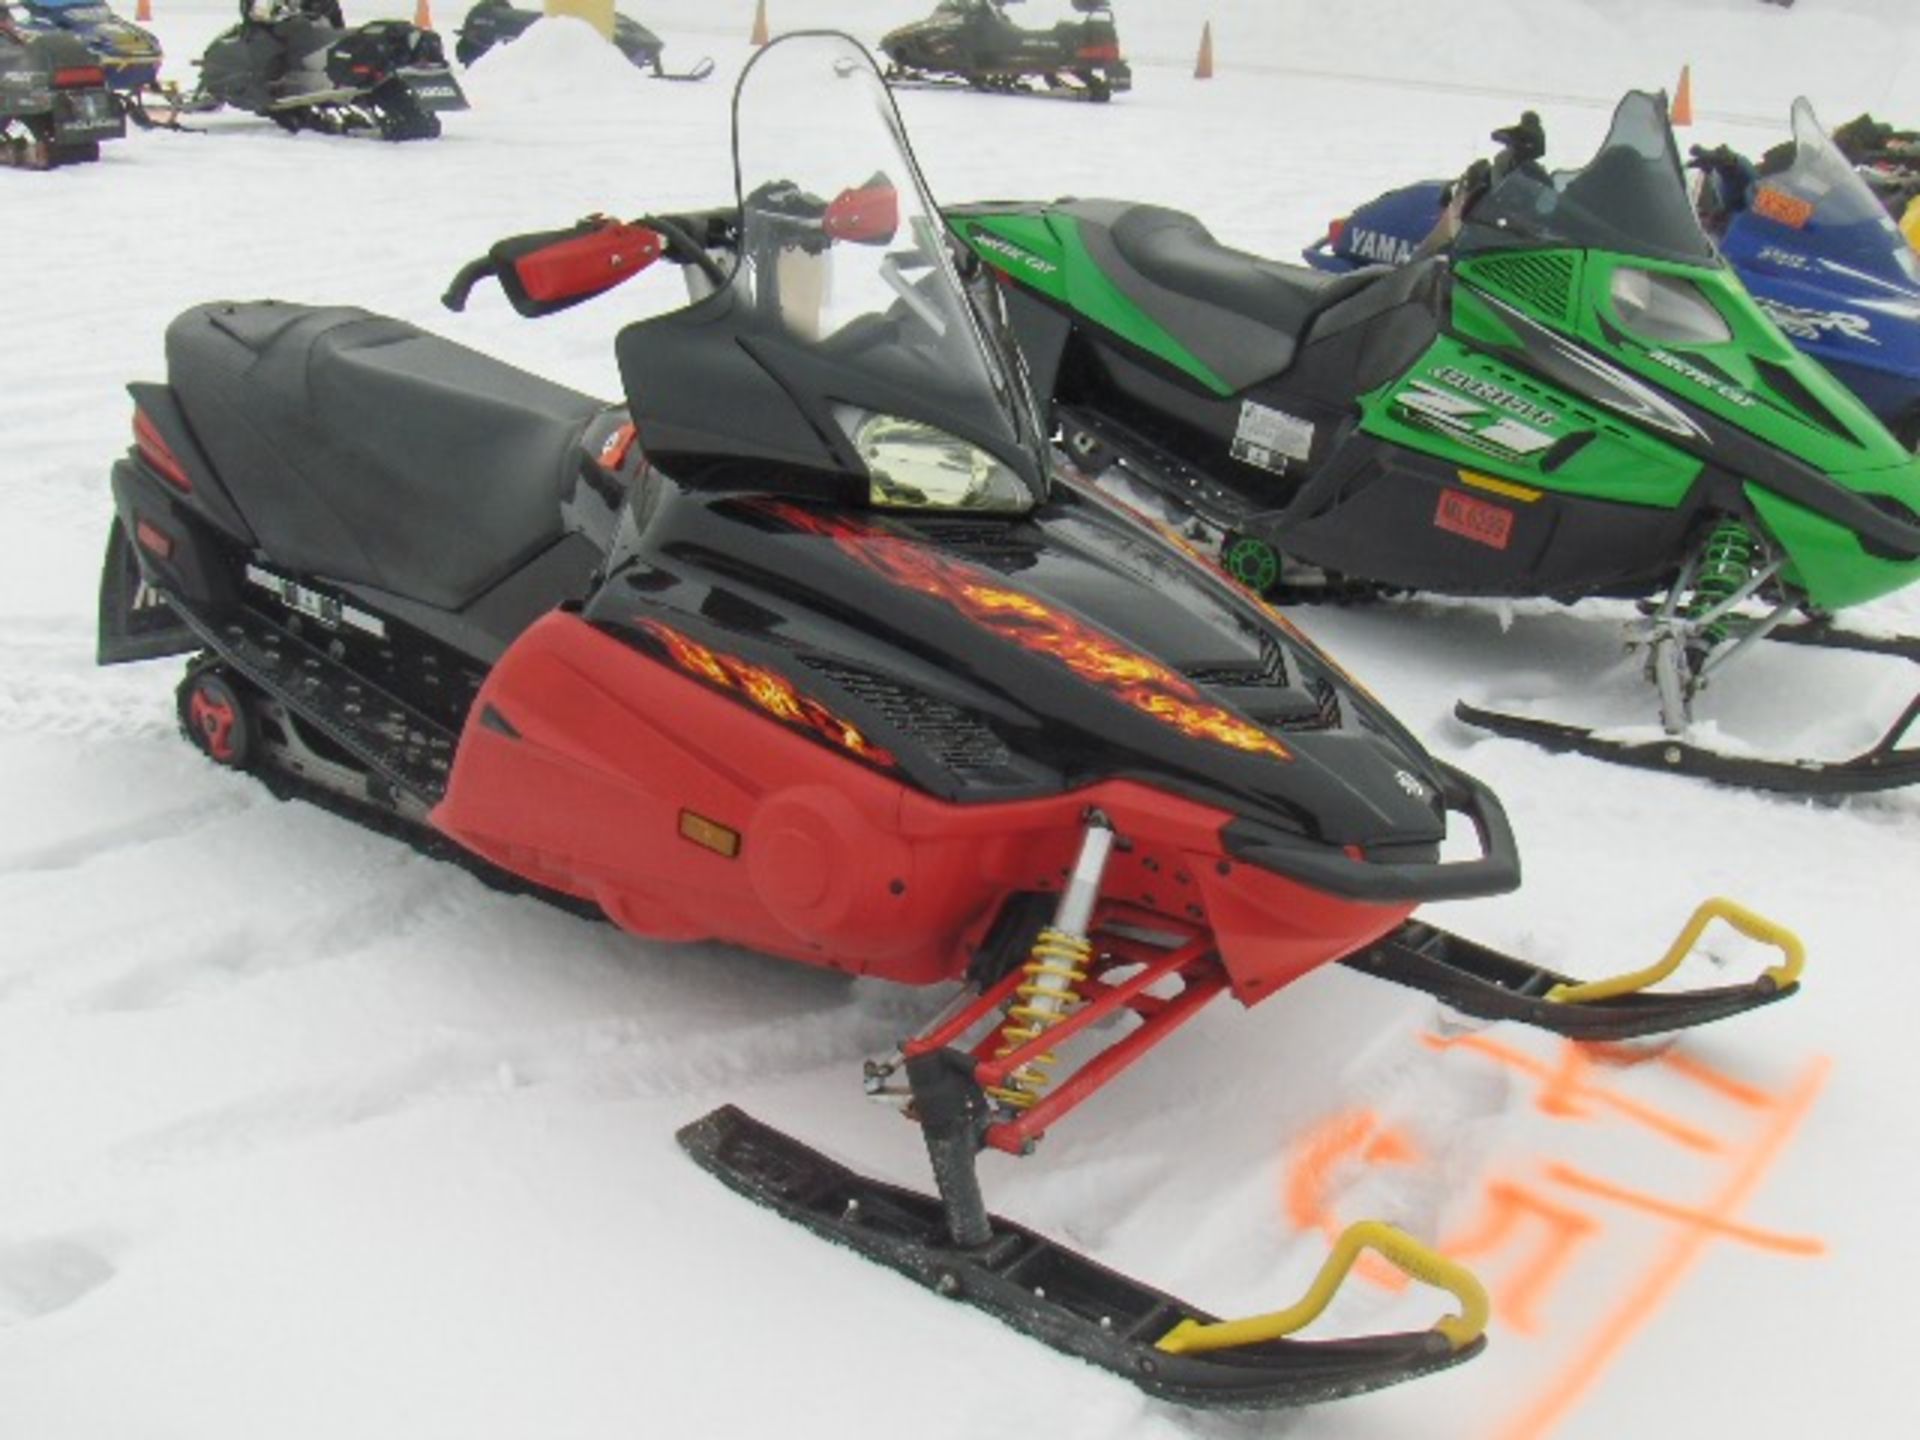 2007 YAMAHA NYTRO  JYE8GH0087A003918 snowmobile, owner started at time of auction check in, electric - Image 2 of 4